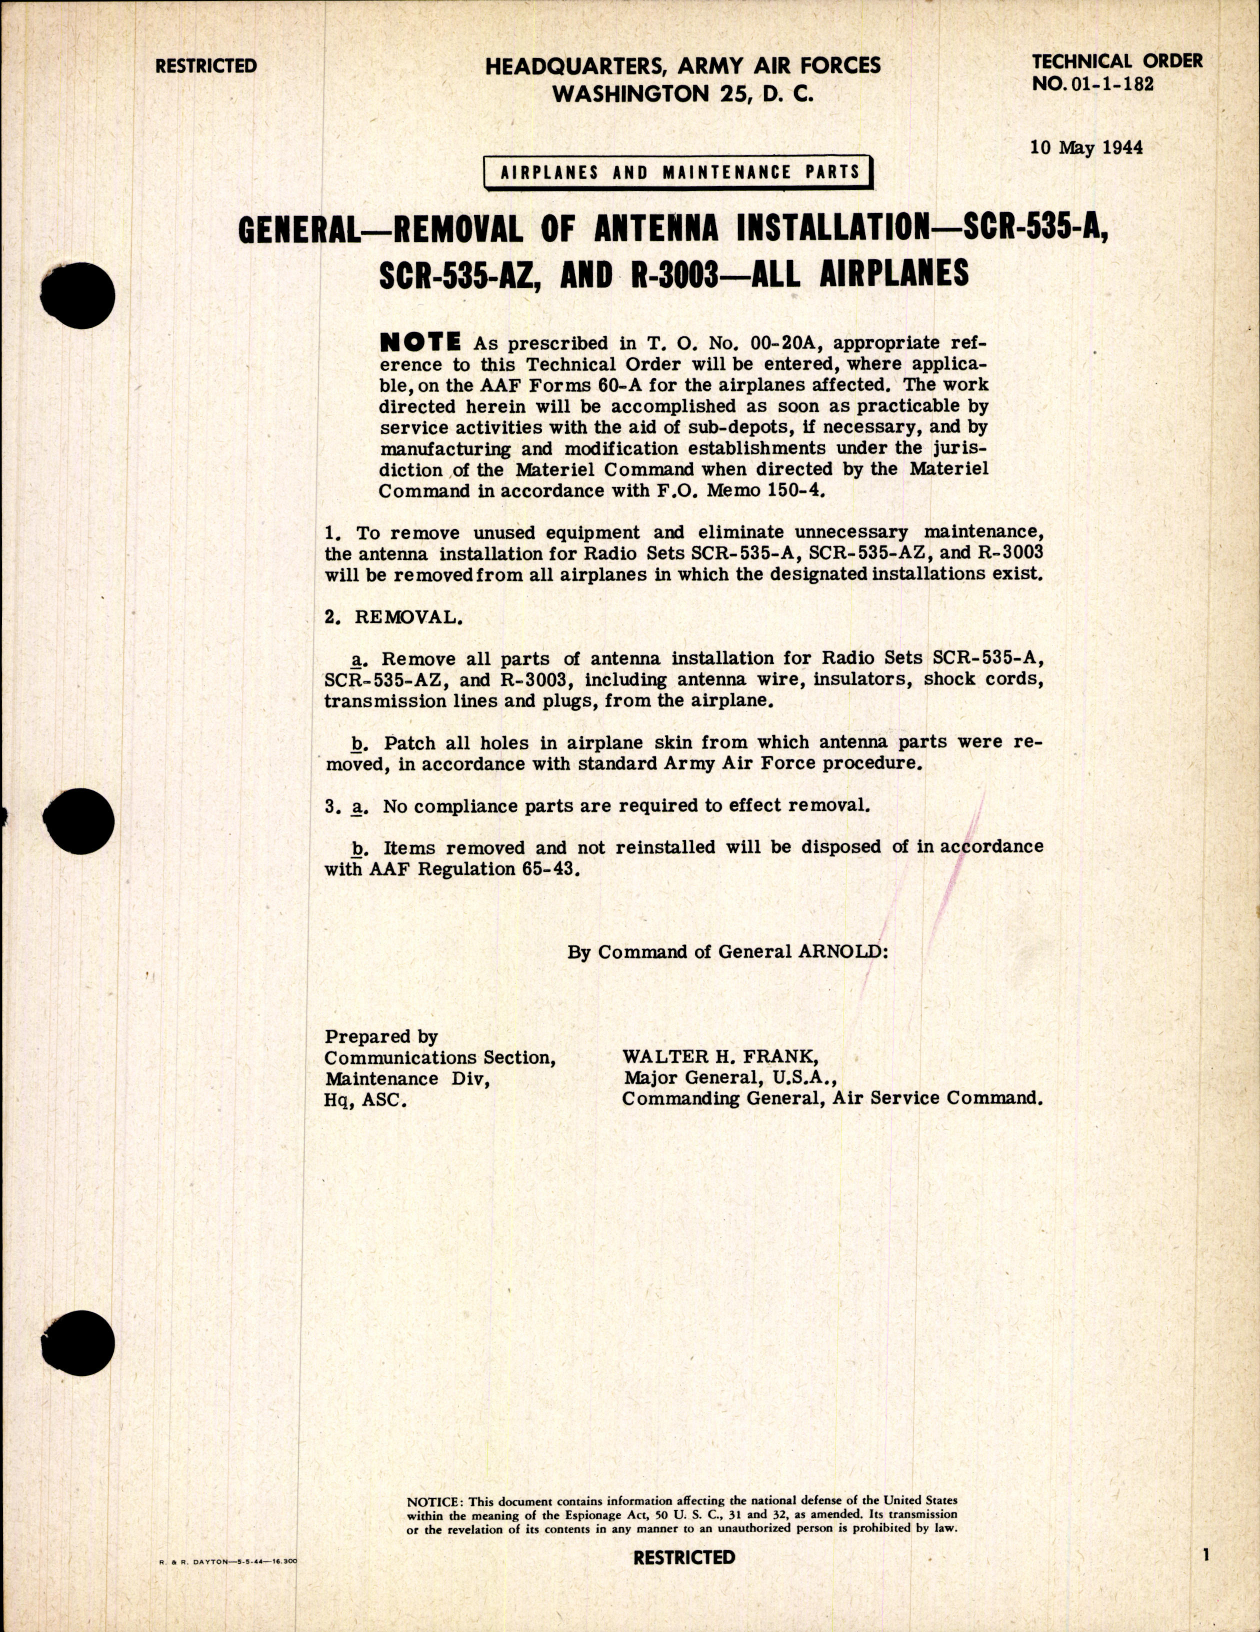 Sample page 1 from AirCorps Library document: Removal of Antenna Installation for SCR-535-A, SCR-535-AZ, and R-3003 in All Airplanes